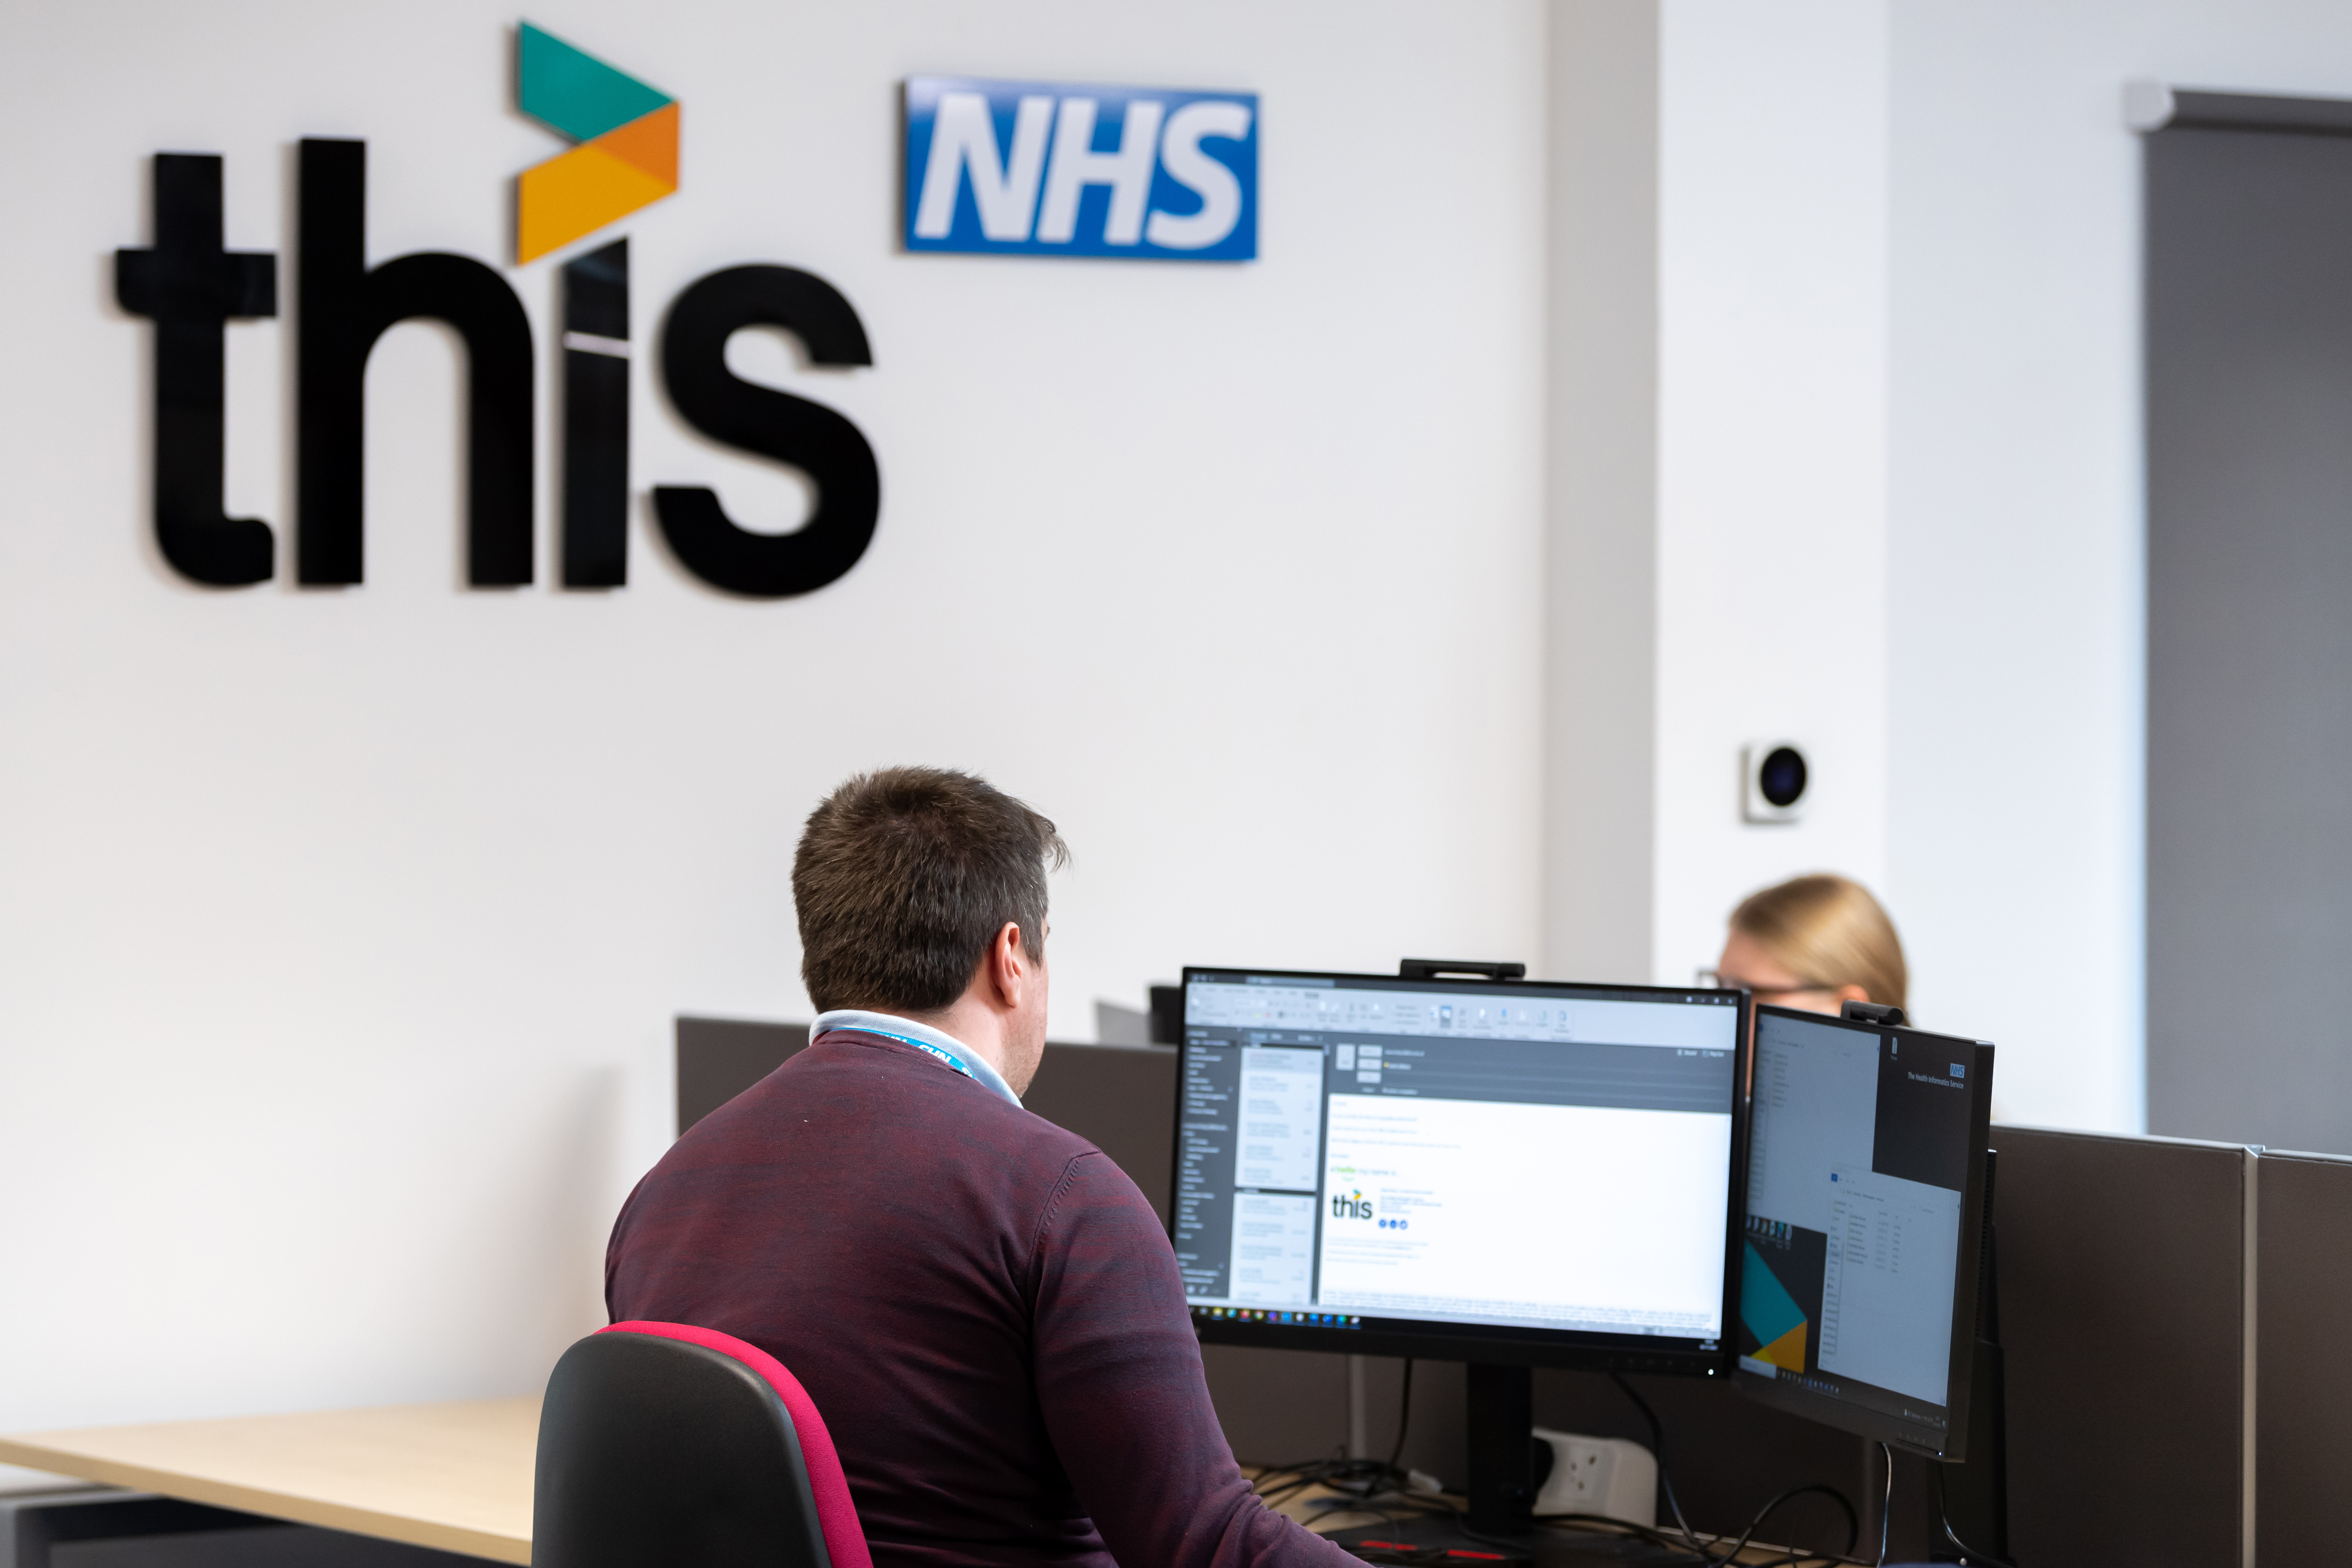 NHS / Healthcare Worker Using A Computer At the 'THIS' office